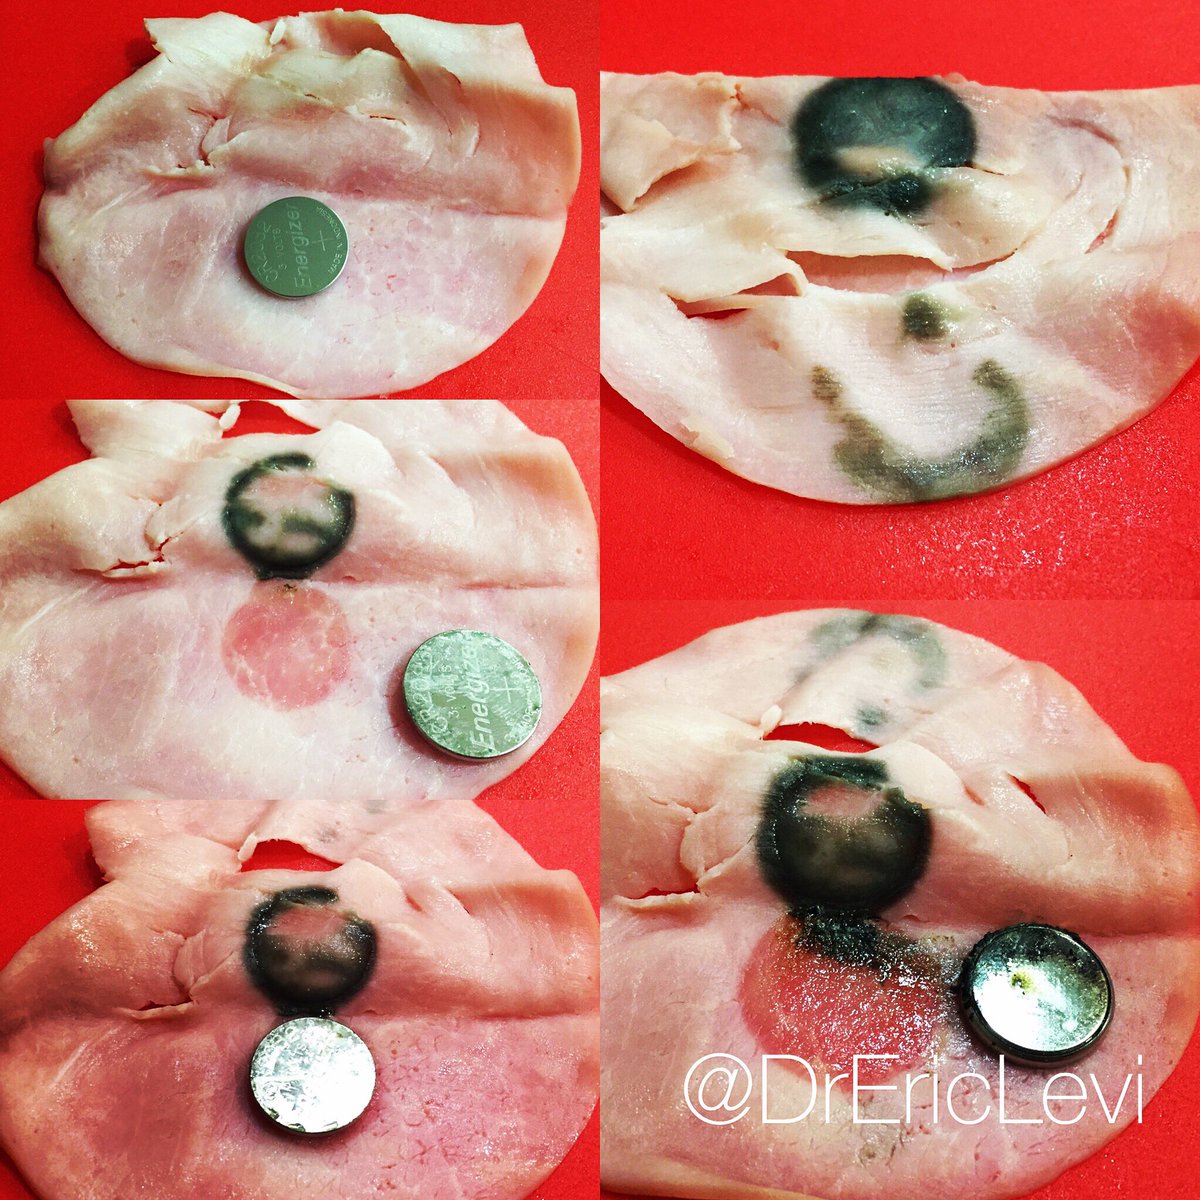 Here’s what it does to ham. My own experiment at home. The pics on left are at 0, 20 minutes and 40 minutes. The 2 pictures on the right are at 60 mins. Burned through 3 layers of ham.